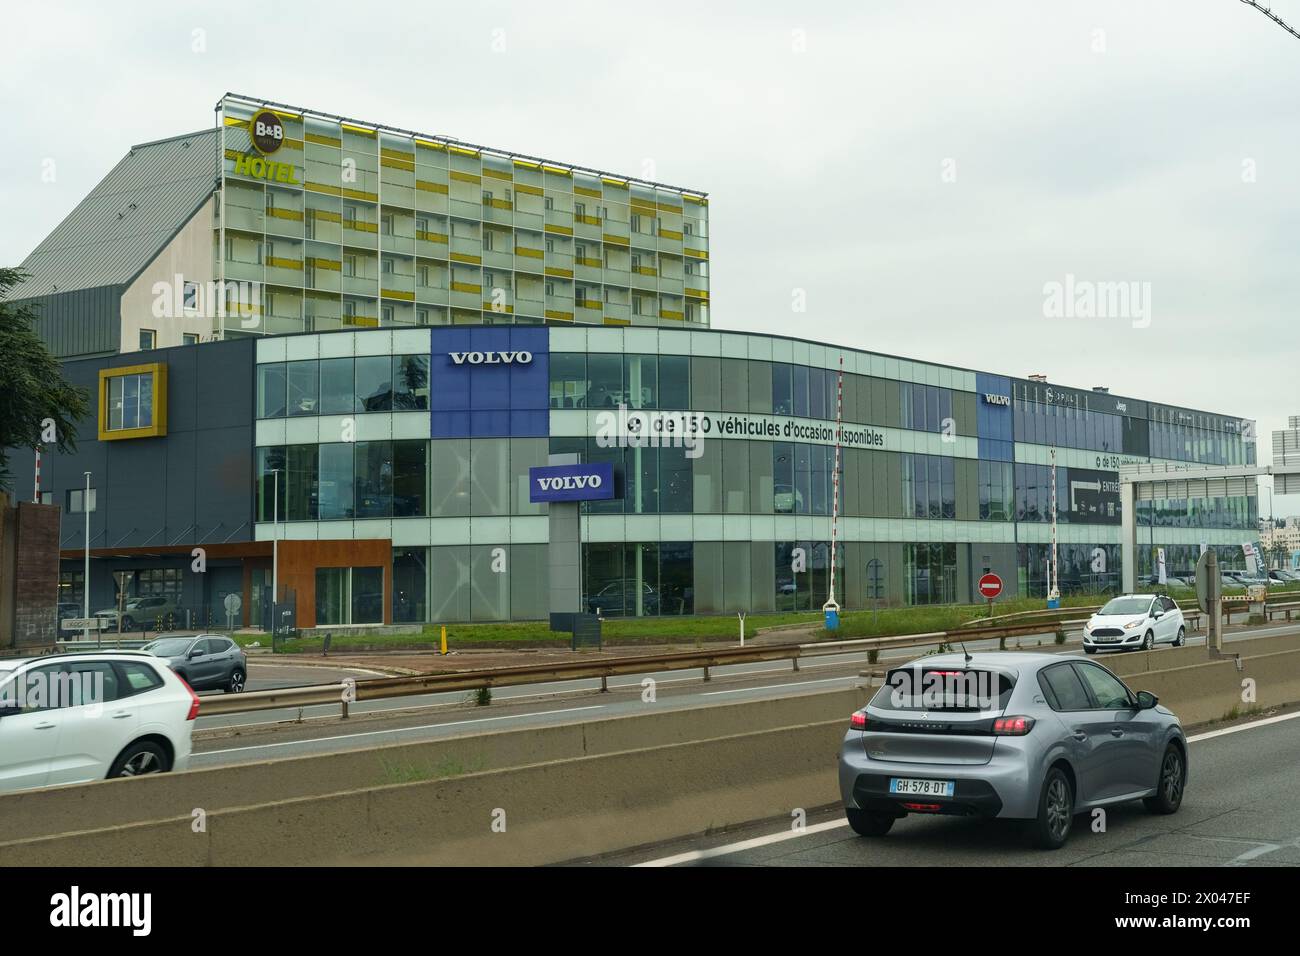 Lyon, France - May 16, 2023: The facade of a Volvo car dealership, with vehicles displayed behind large glass windows and a Volvo sign prominently fea Stock Photo